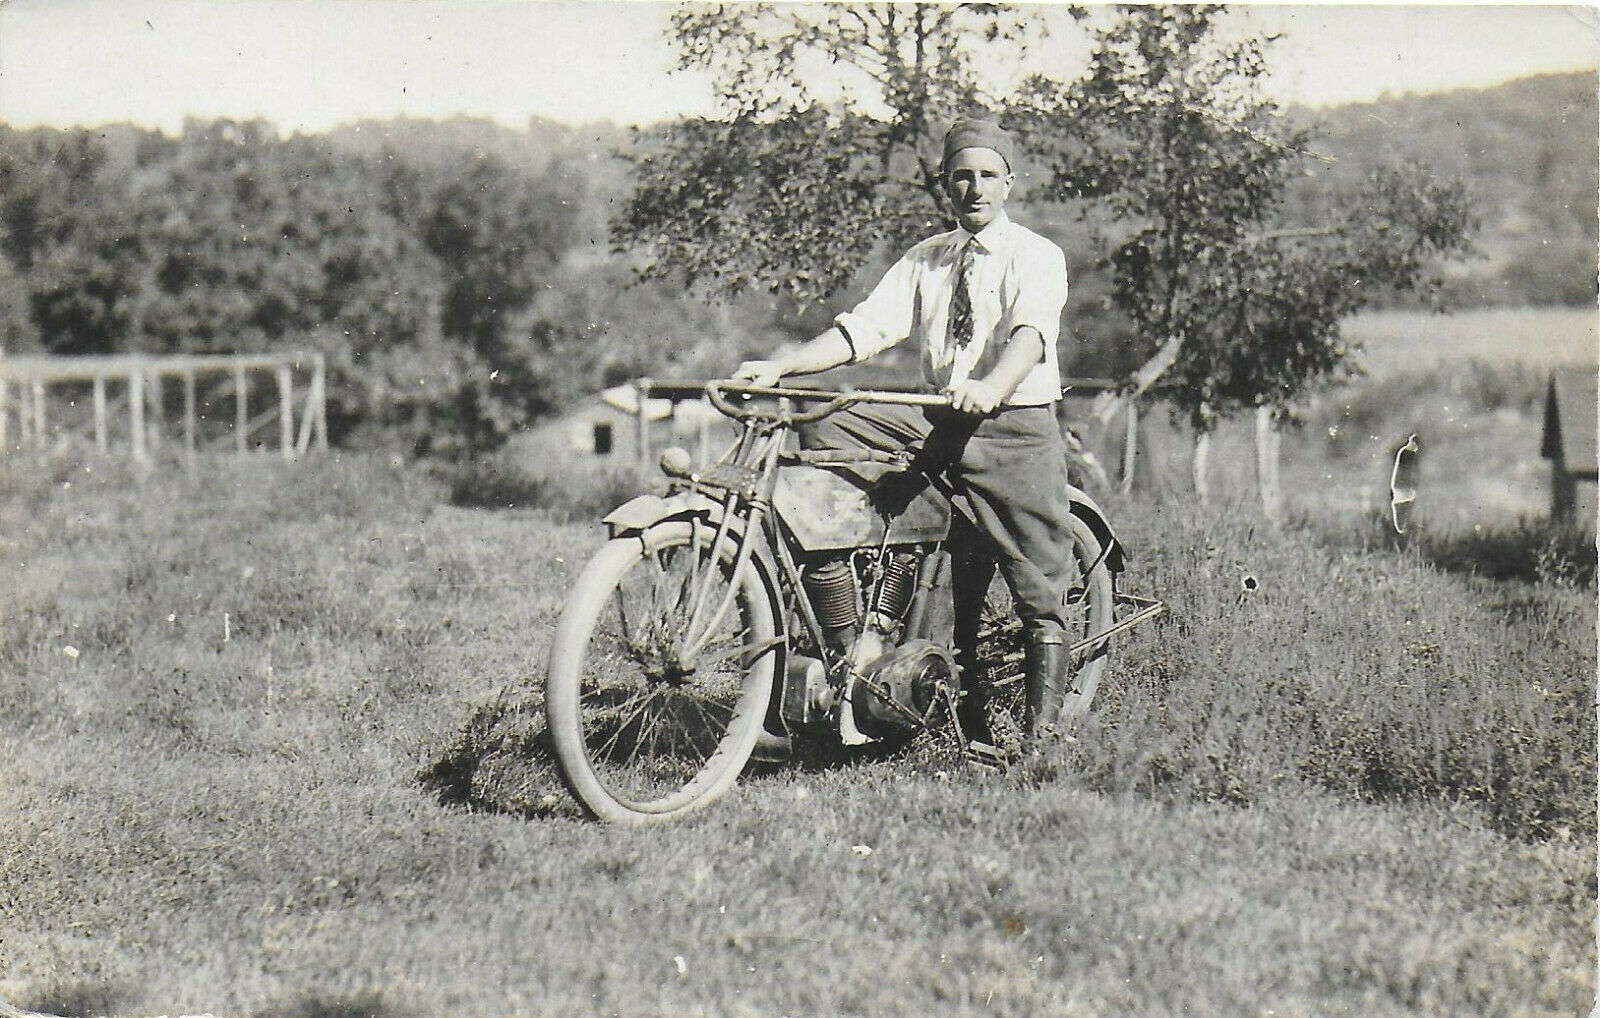 Rppc Of Man Posed On A C1914-16 Excelsior Motorcycle Outdoors